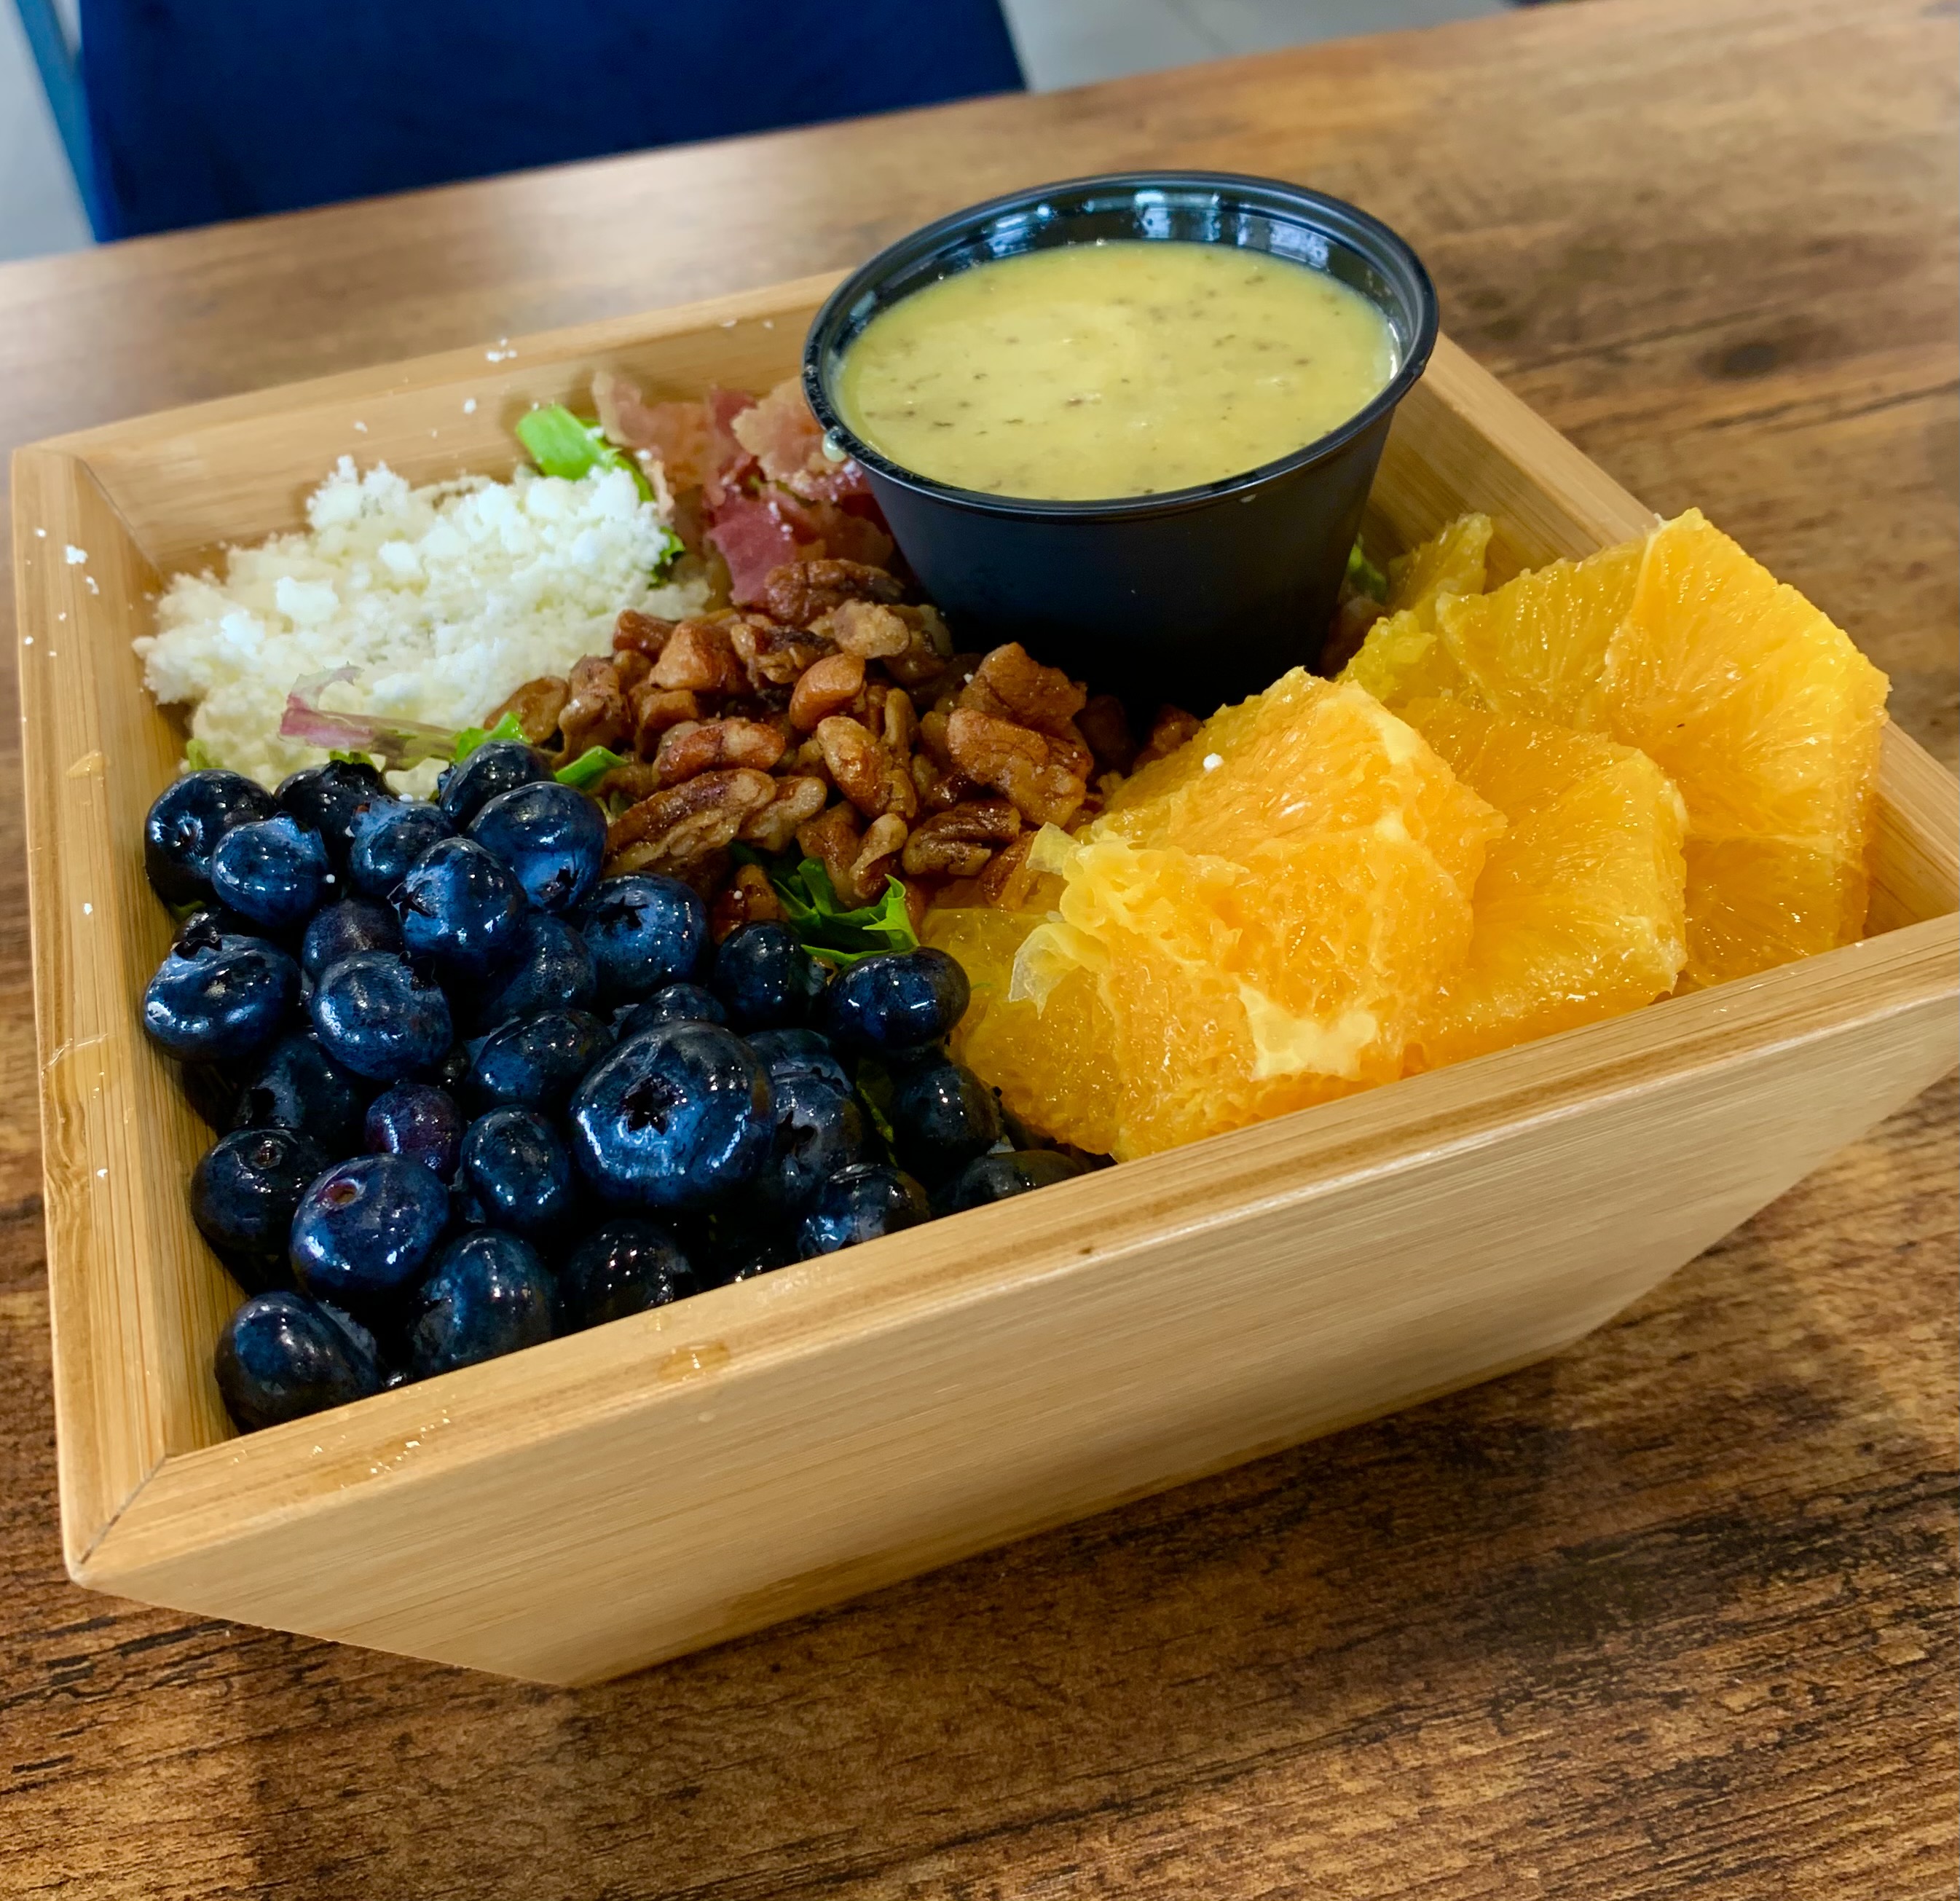 In a wooden square basket, there is a salad topped with lots of fresh fruit like blueberries and orange slices. Photo by Stephanie Wheatley.